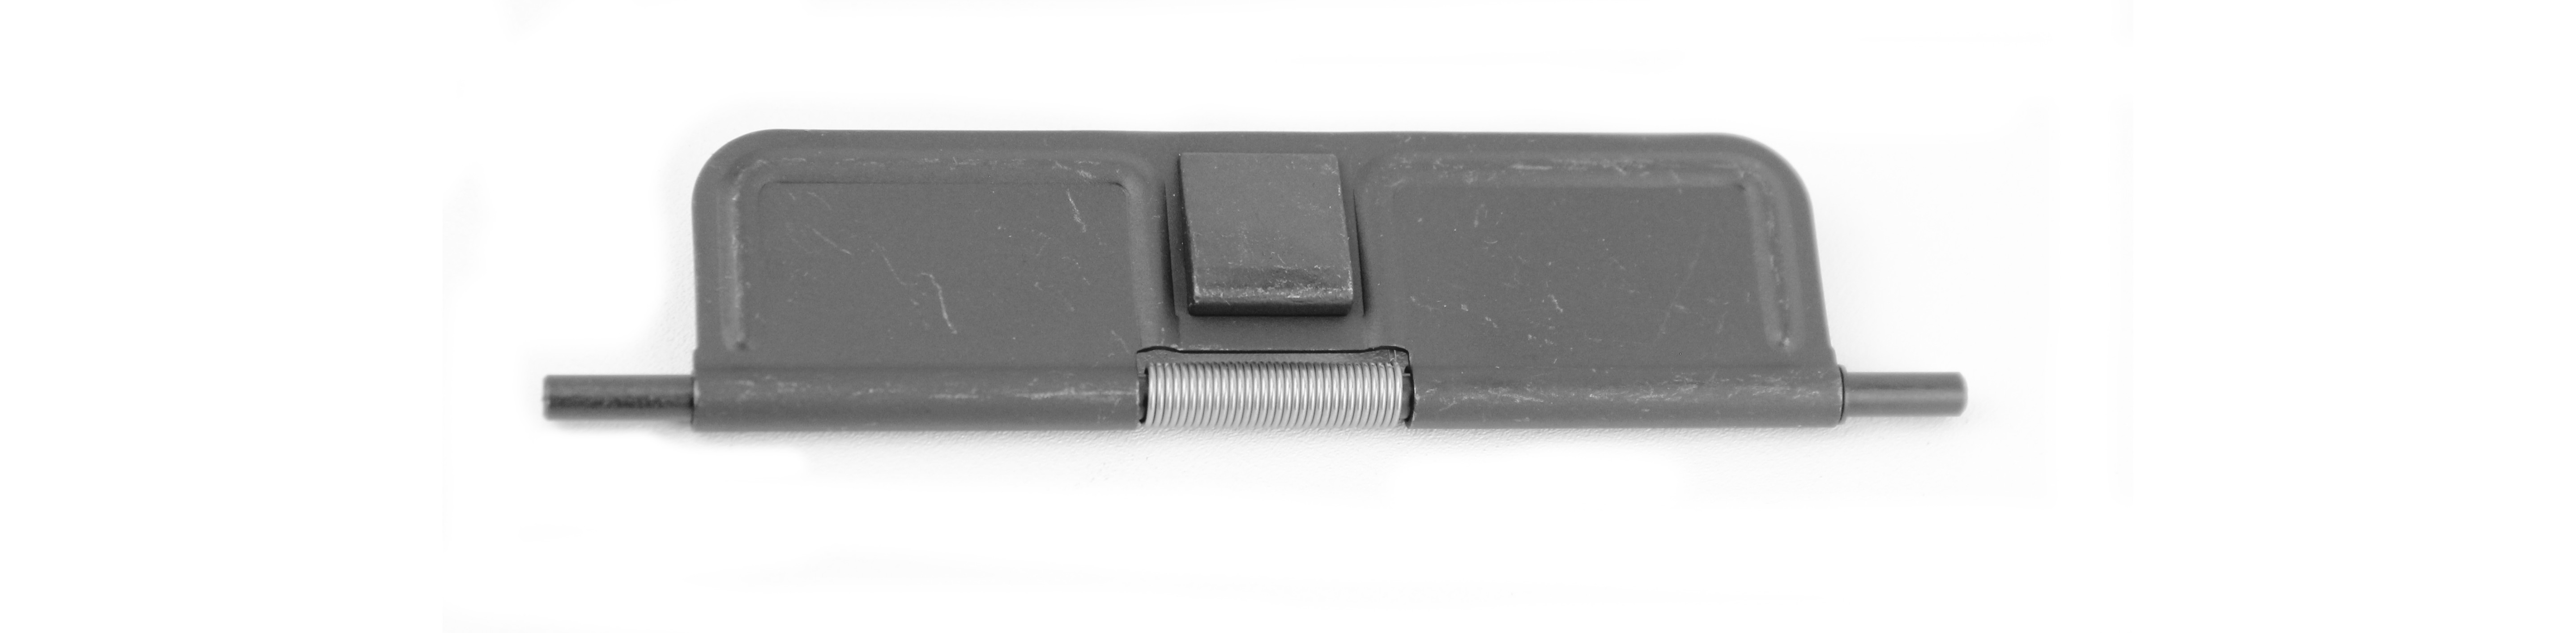 ejection port cover AR-15